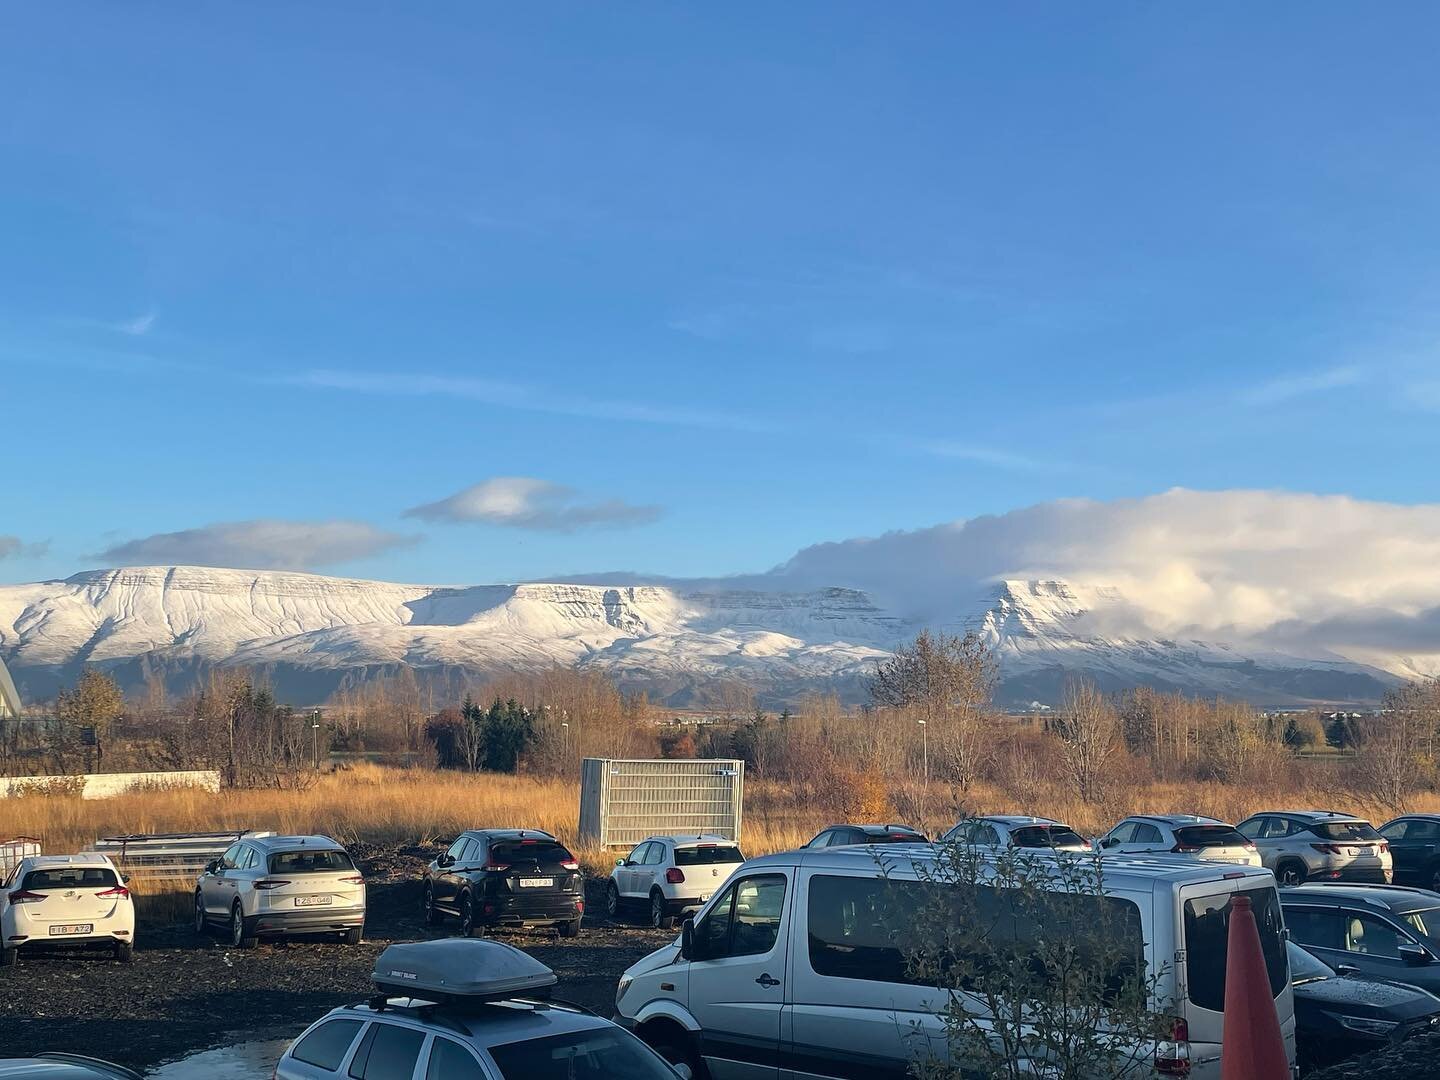 the mountains are getting snowier here 👀🥶🤍